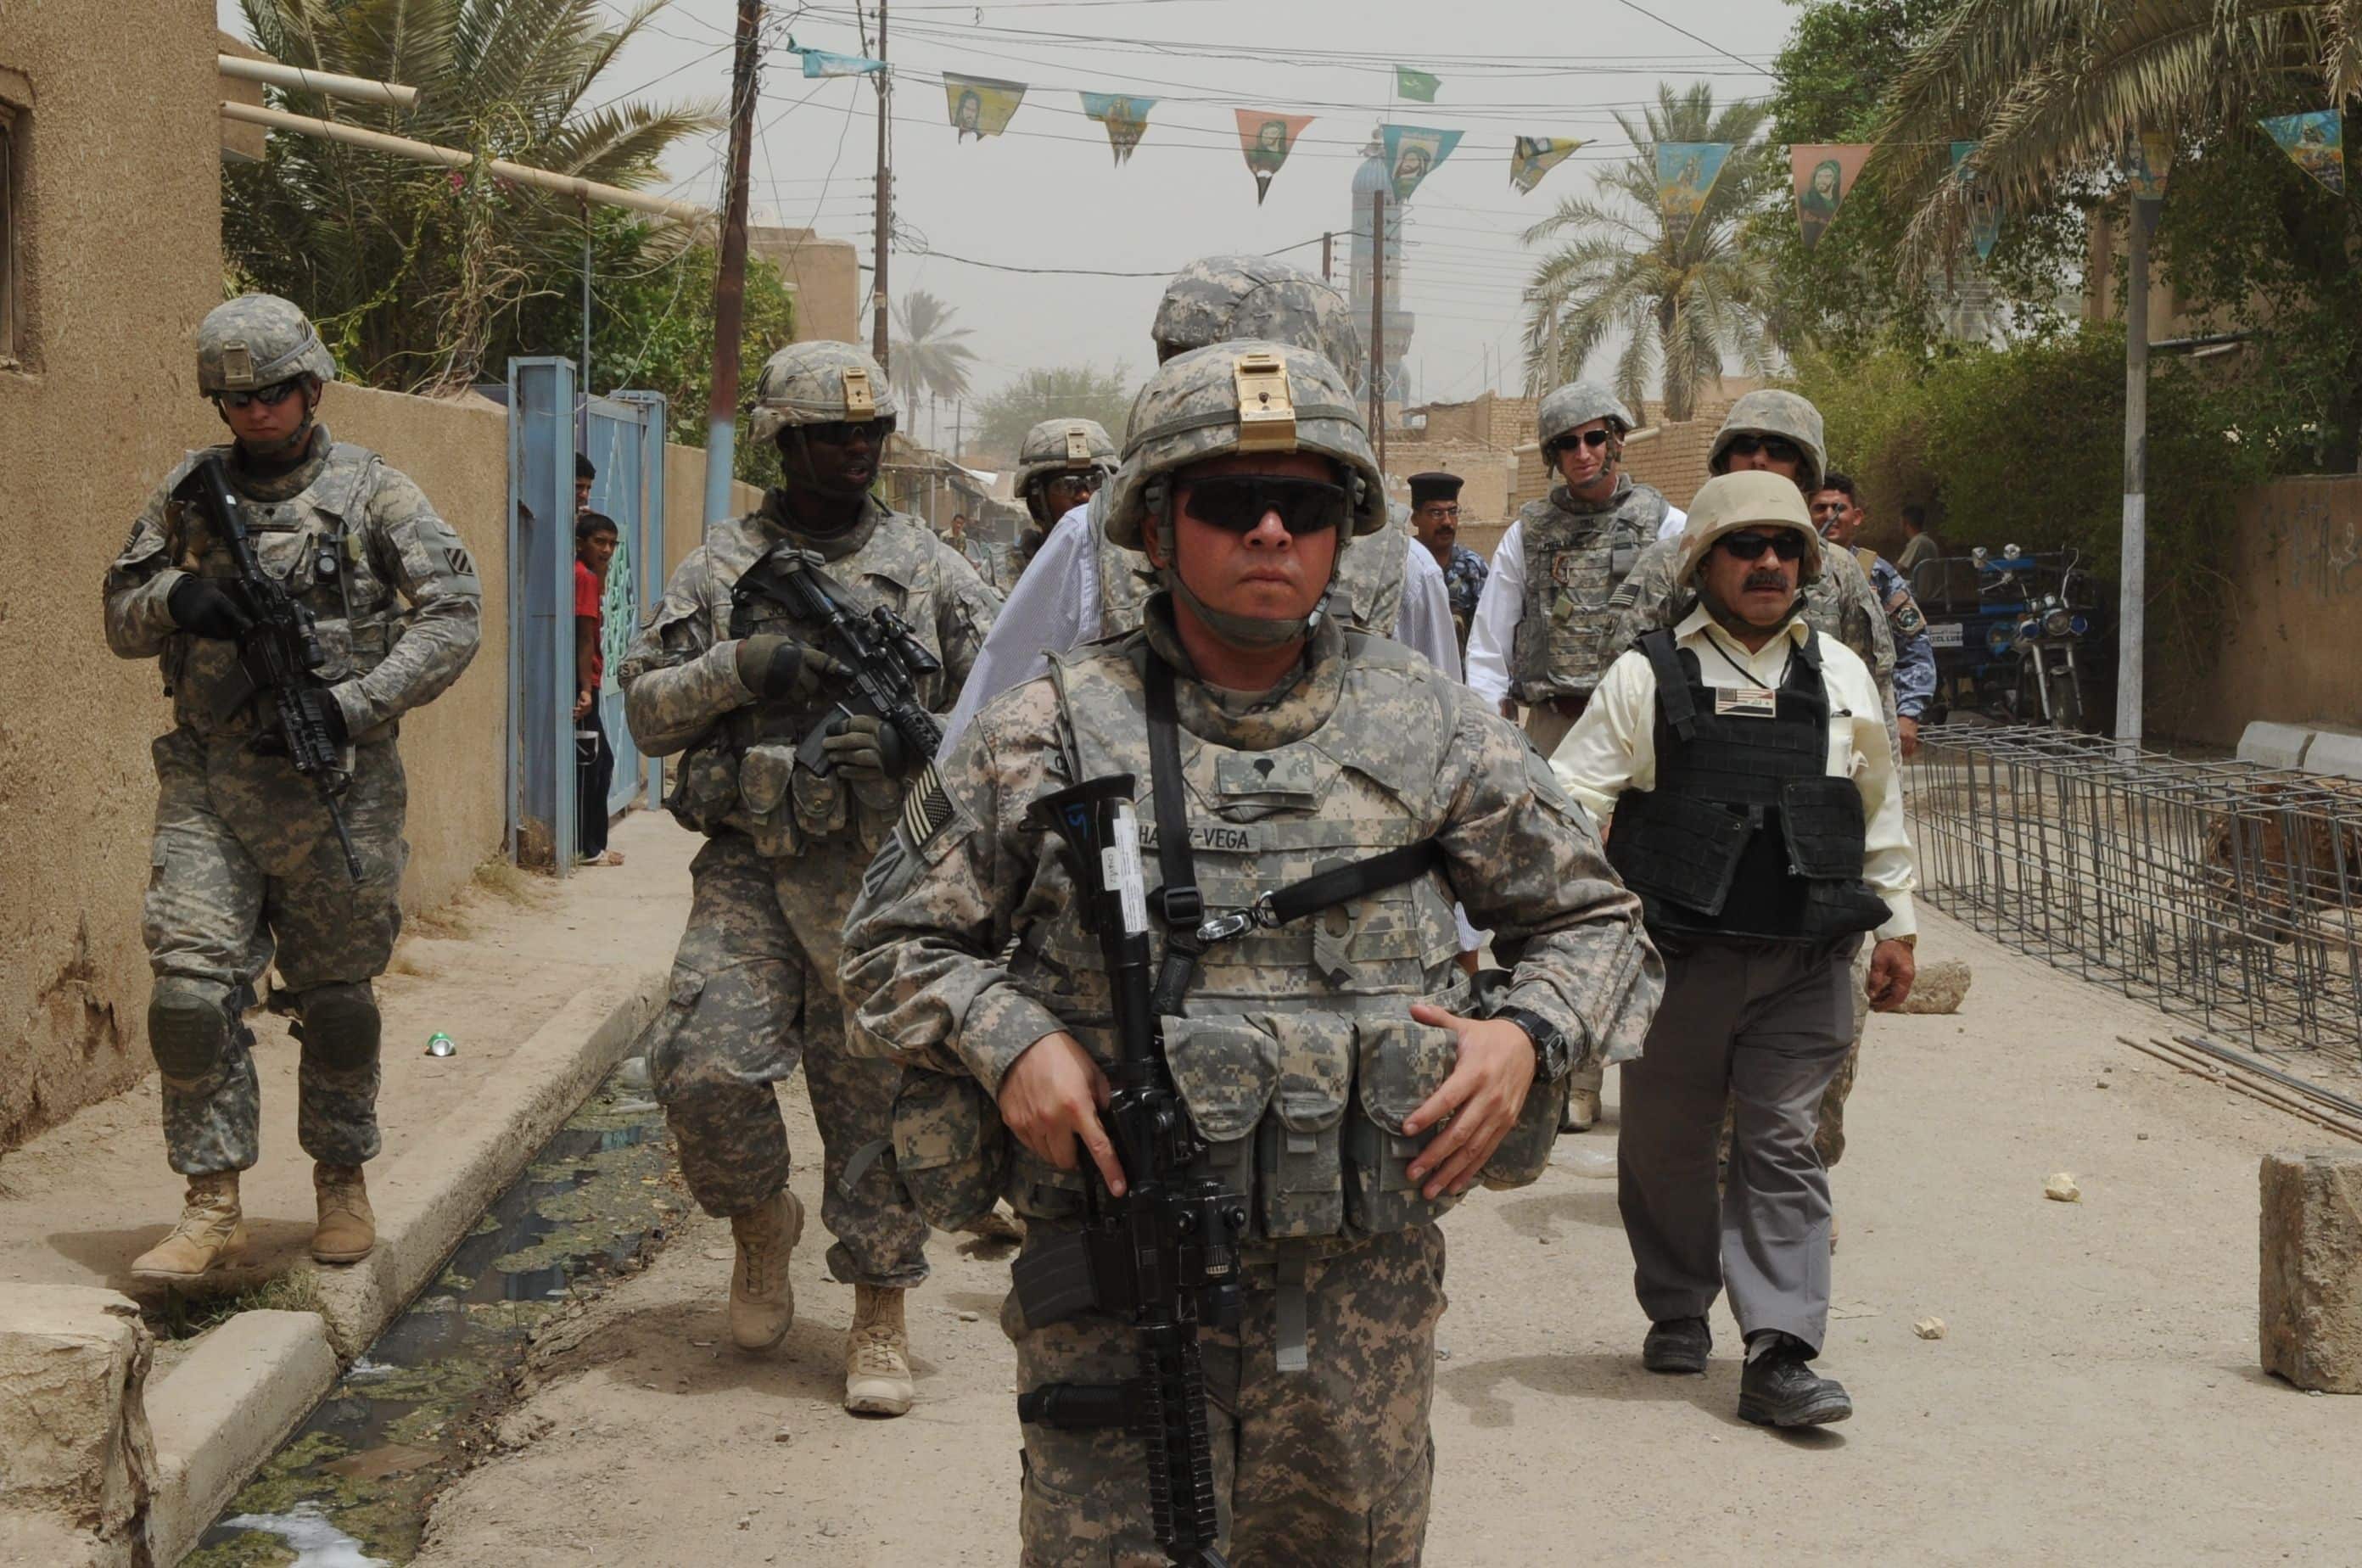 U.S. Soldiers assigned to Bravo Company,1st Battalion, 10th Field Artillery Regiment, 3rd Heavy Brigade Combat Team, 3rd Infantry Division along with U.S. Dr. Ike Khan, from Chicago, Provincial Reconstruction Team member, walk to a building under construction in Wasit province, Iraq, July 22. U.S. forces assisted Iraqi forces in building,renovation, and Humanitarian Aid in support of Operation Iraqi Freedom.